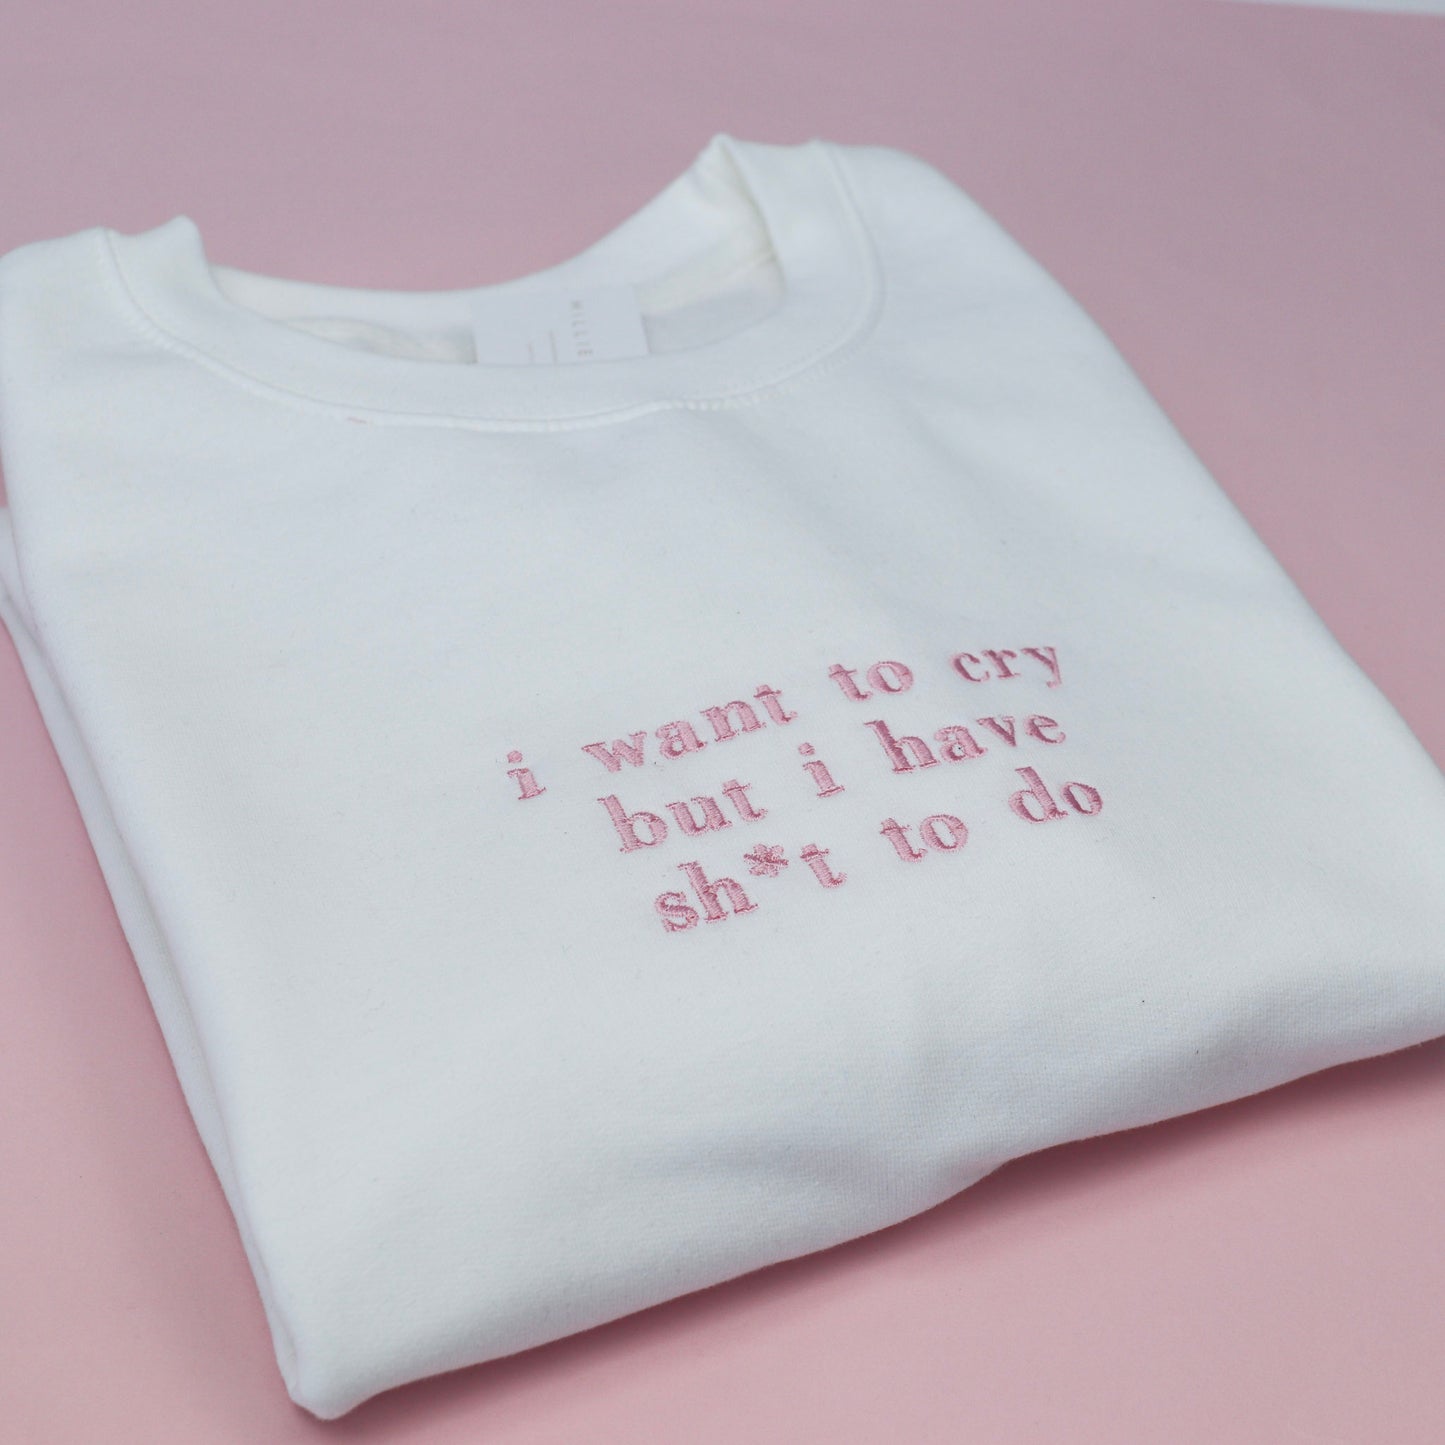 i want to cry but I have sh*t to do Embroidered Unisex Adults Sweatshirt